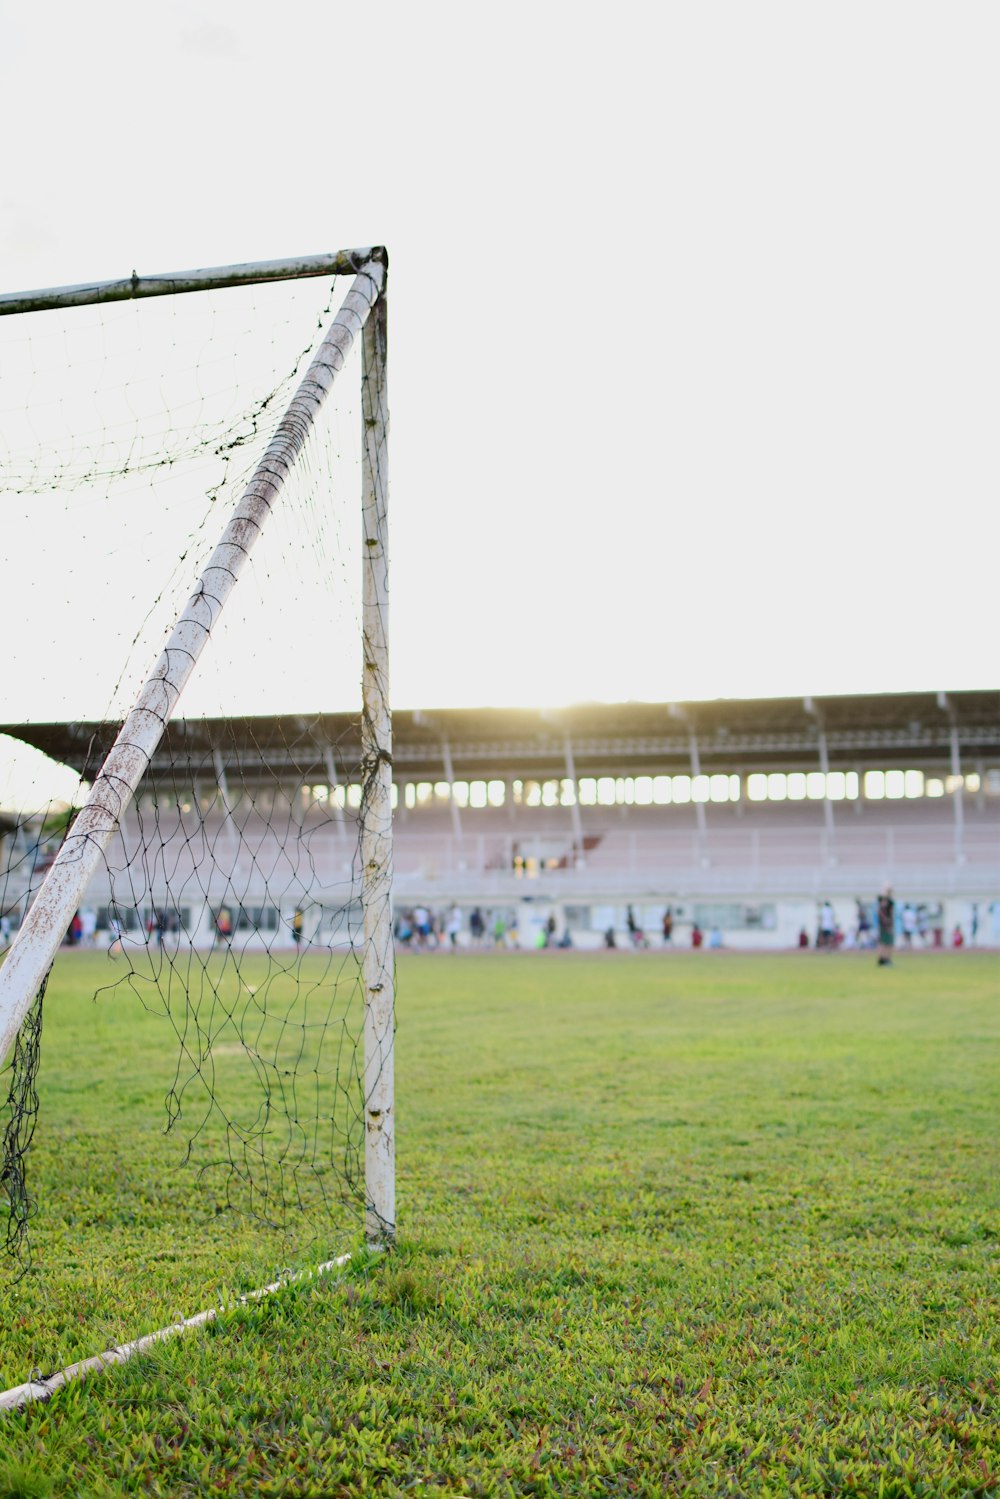 Football Net Pictures  Download Free Images on Unsplash